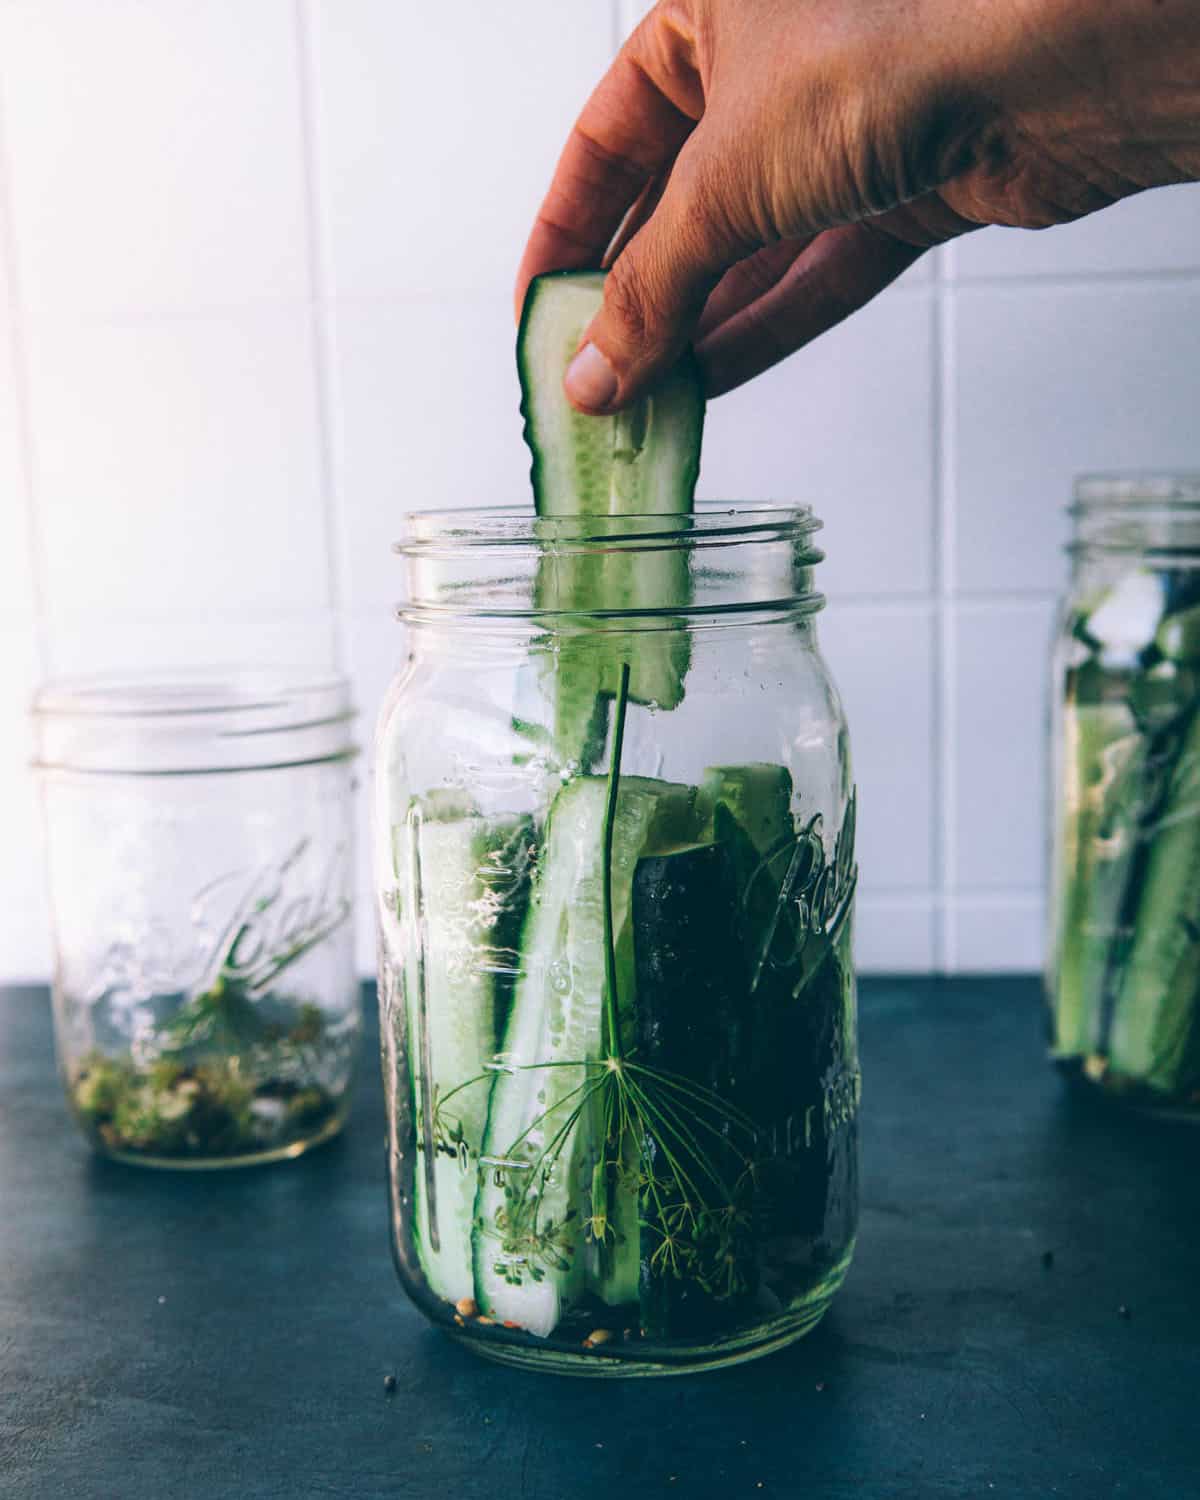 Homemade Fermented Cucumbers (Dill Pickles) - Urban Farm and Kitchen